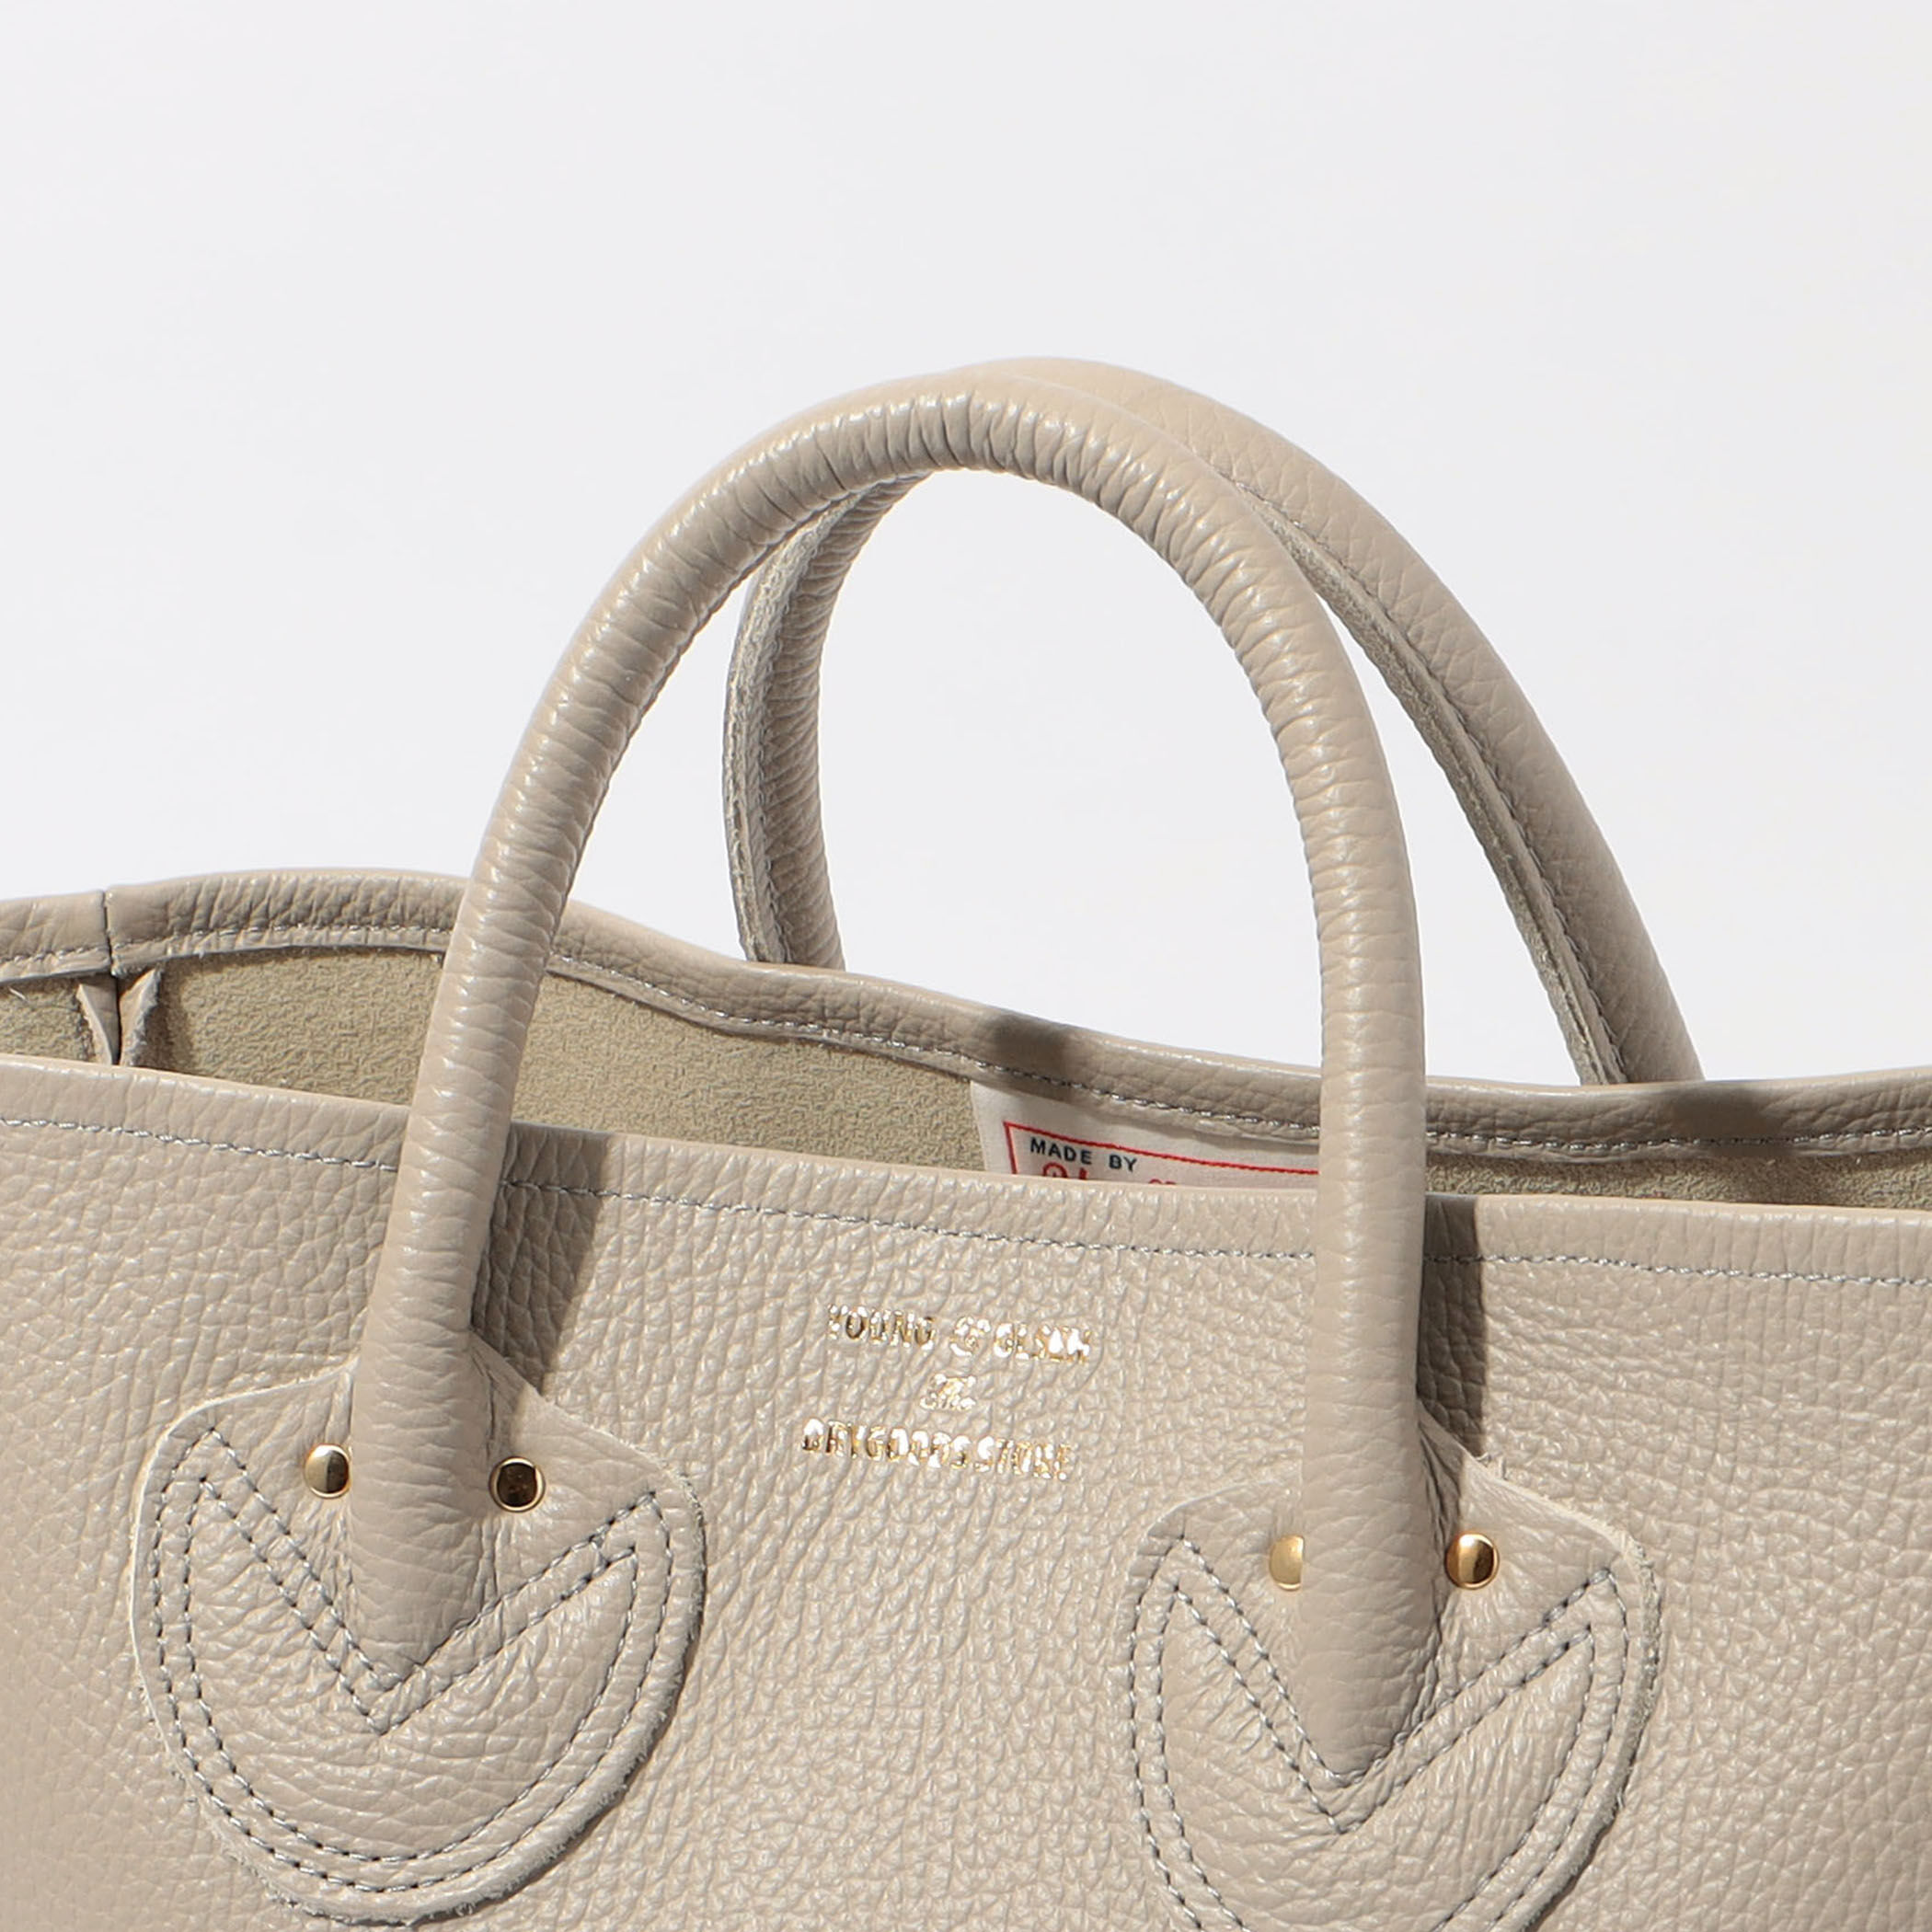 YOUNG&OLSEN EMBOSSED LEATHER TOTE BAG｜トゥモローランド 公式通販